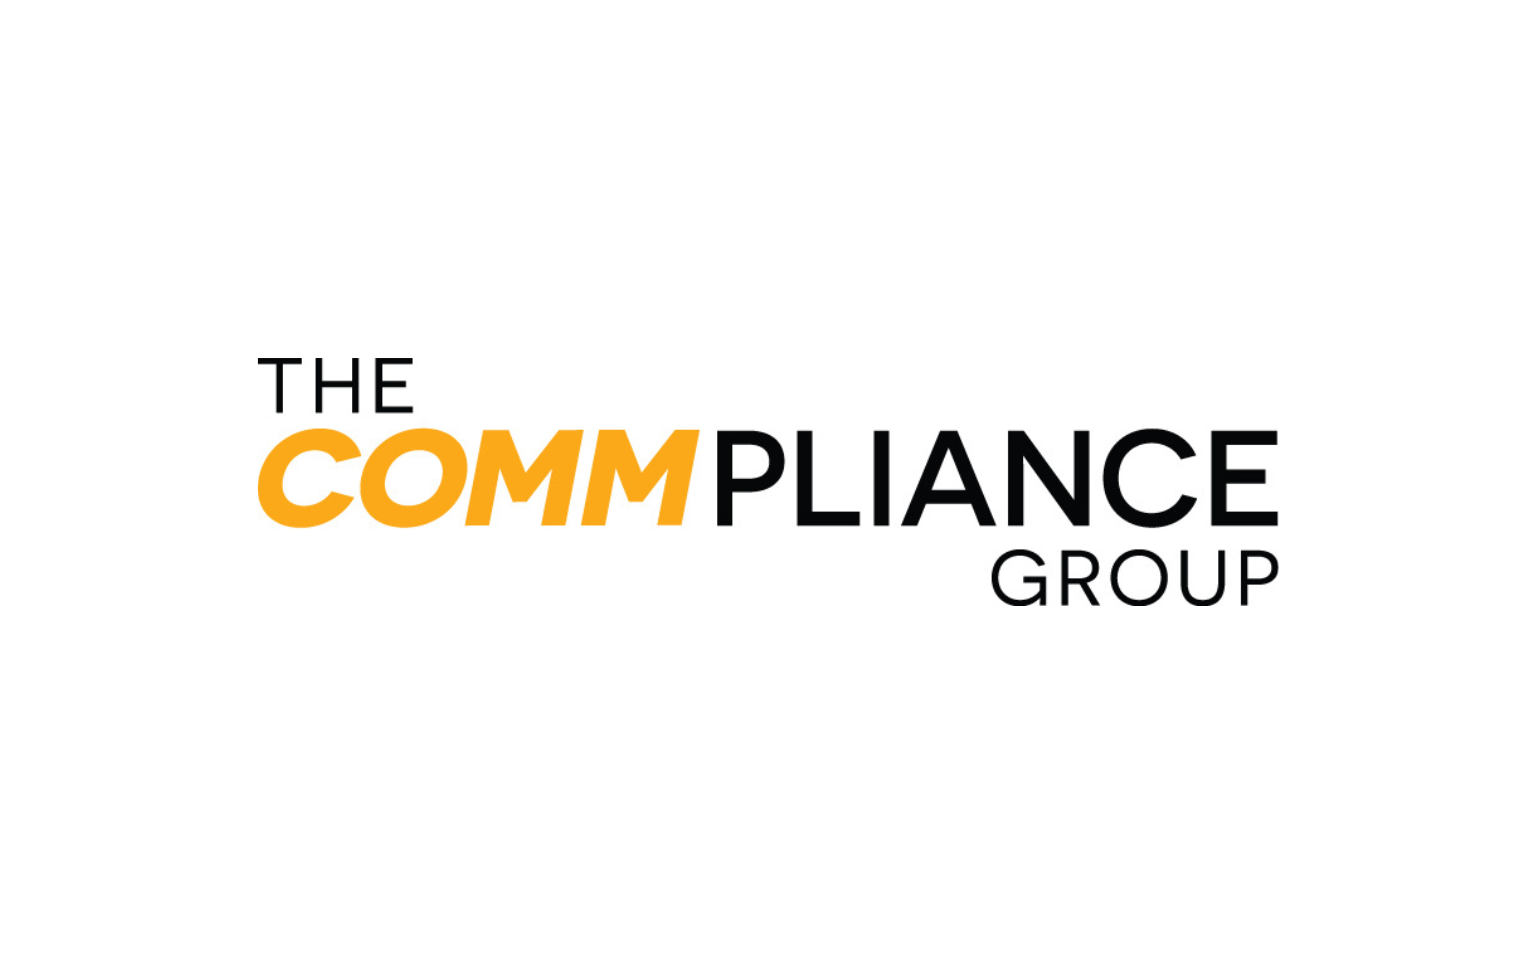 The Commplance Group